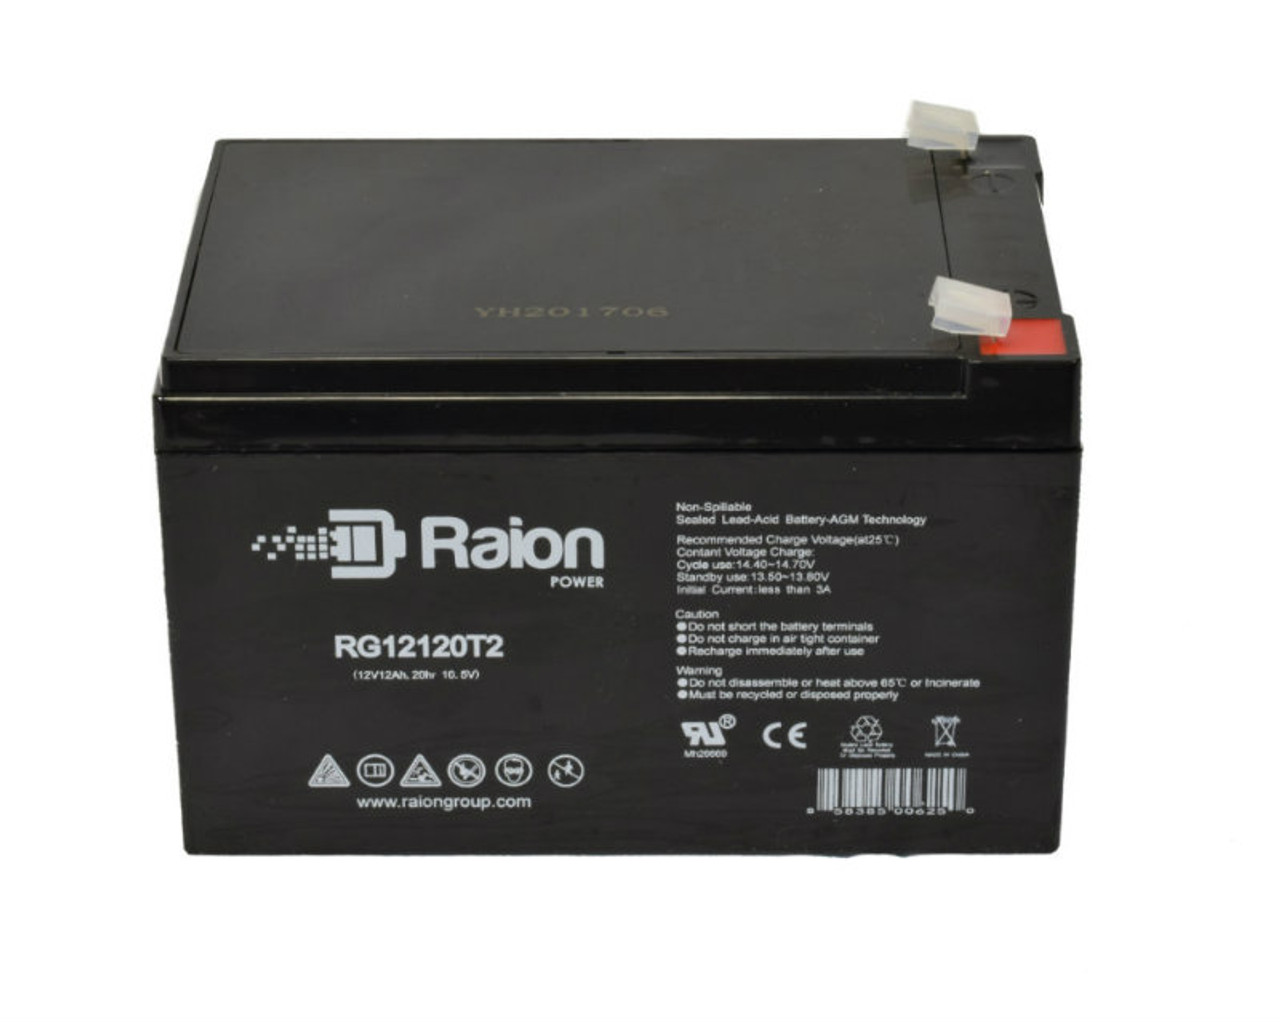 Raion Power RG12120T2 Replacement Battery Cartridge for Minuteman MSU 1000i